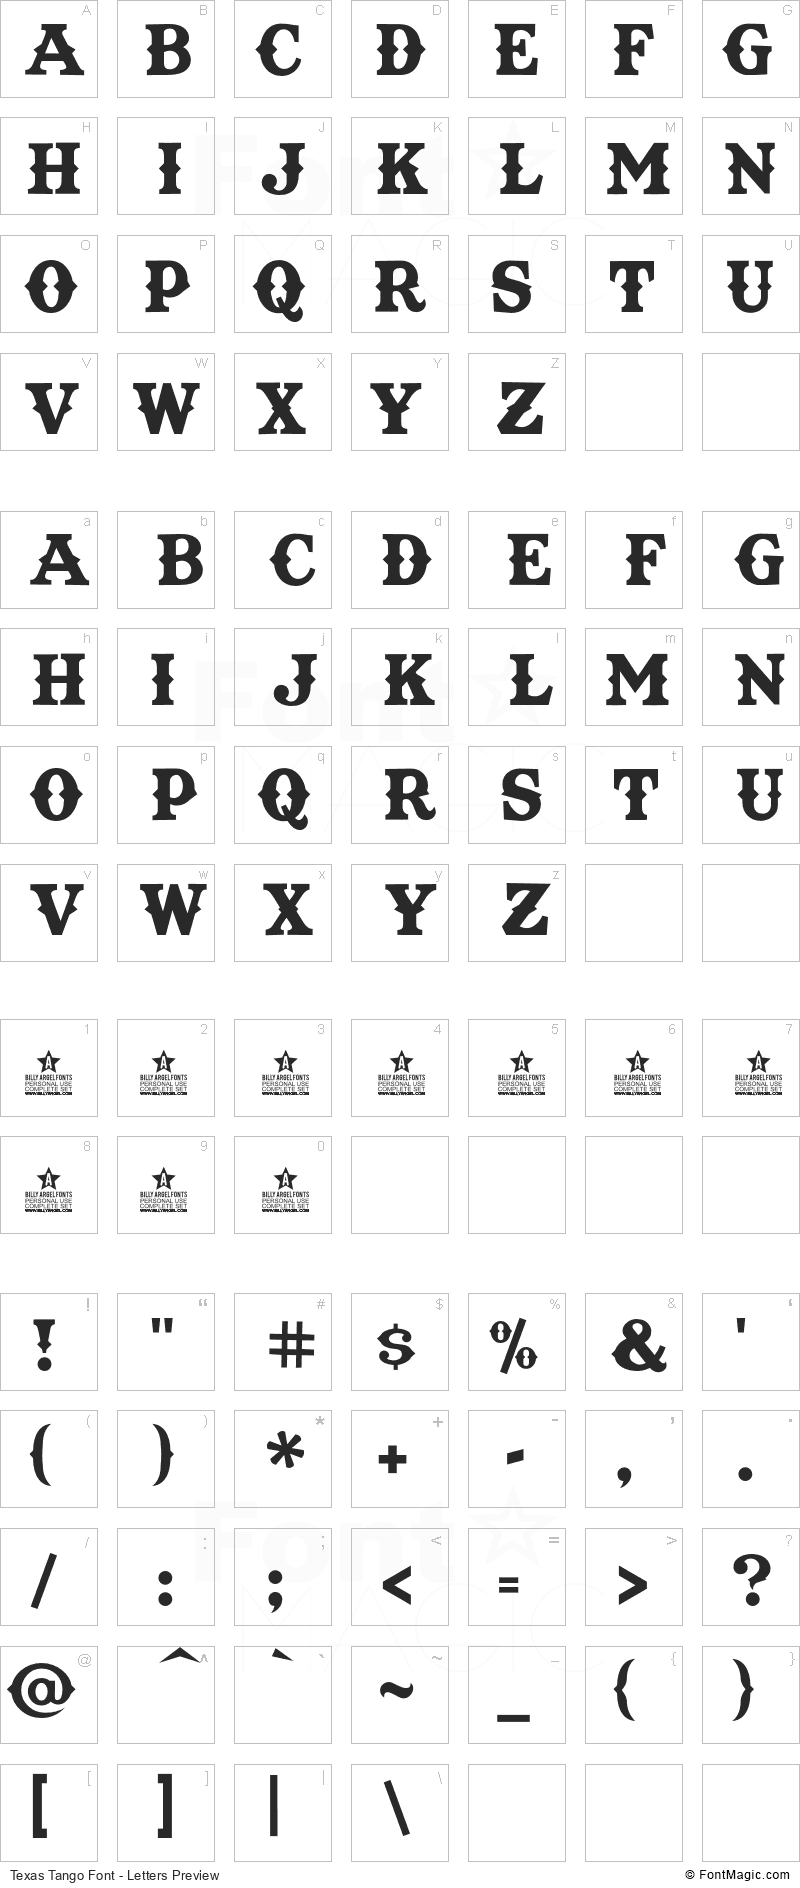 Texas Tango Font - All Latters Preview Chart